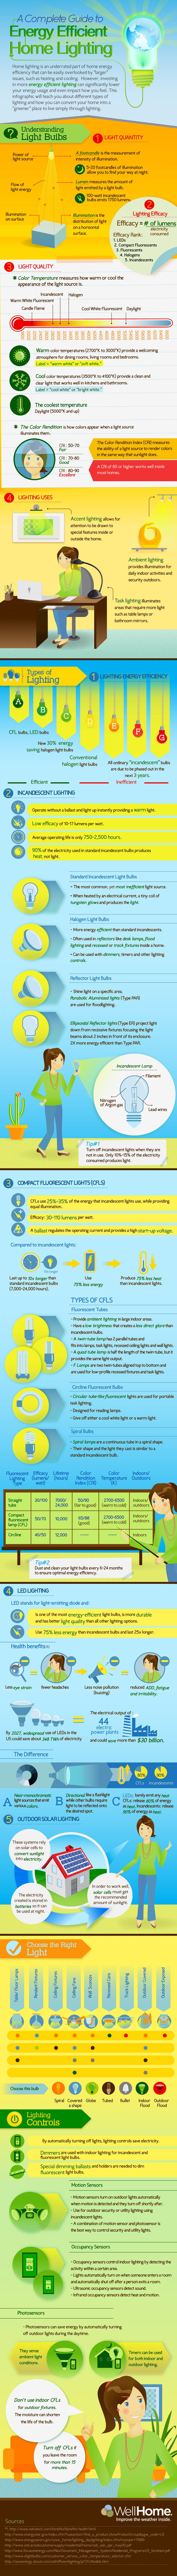 Energy Efficient Home Lighting Guide